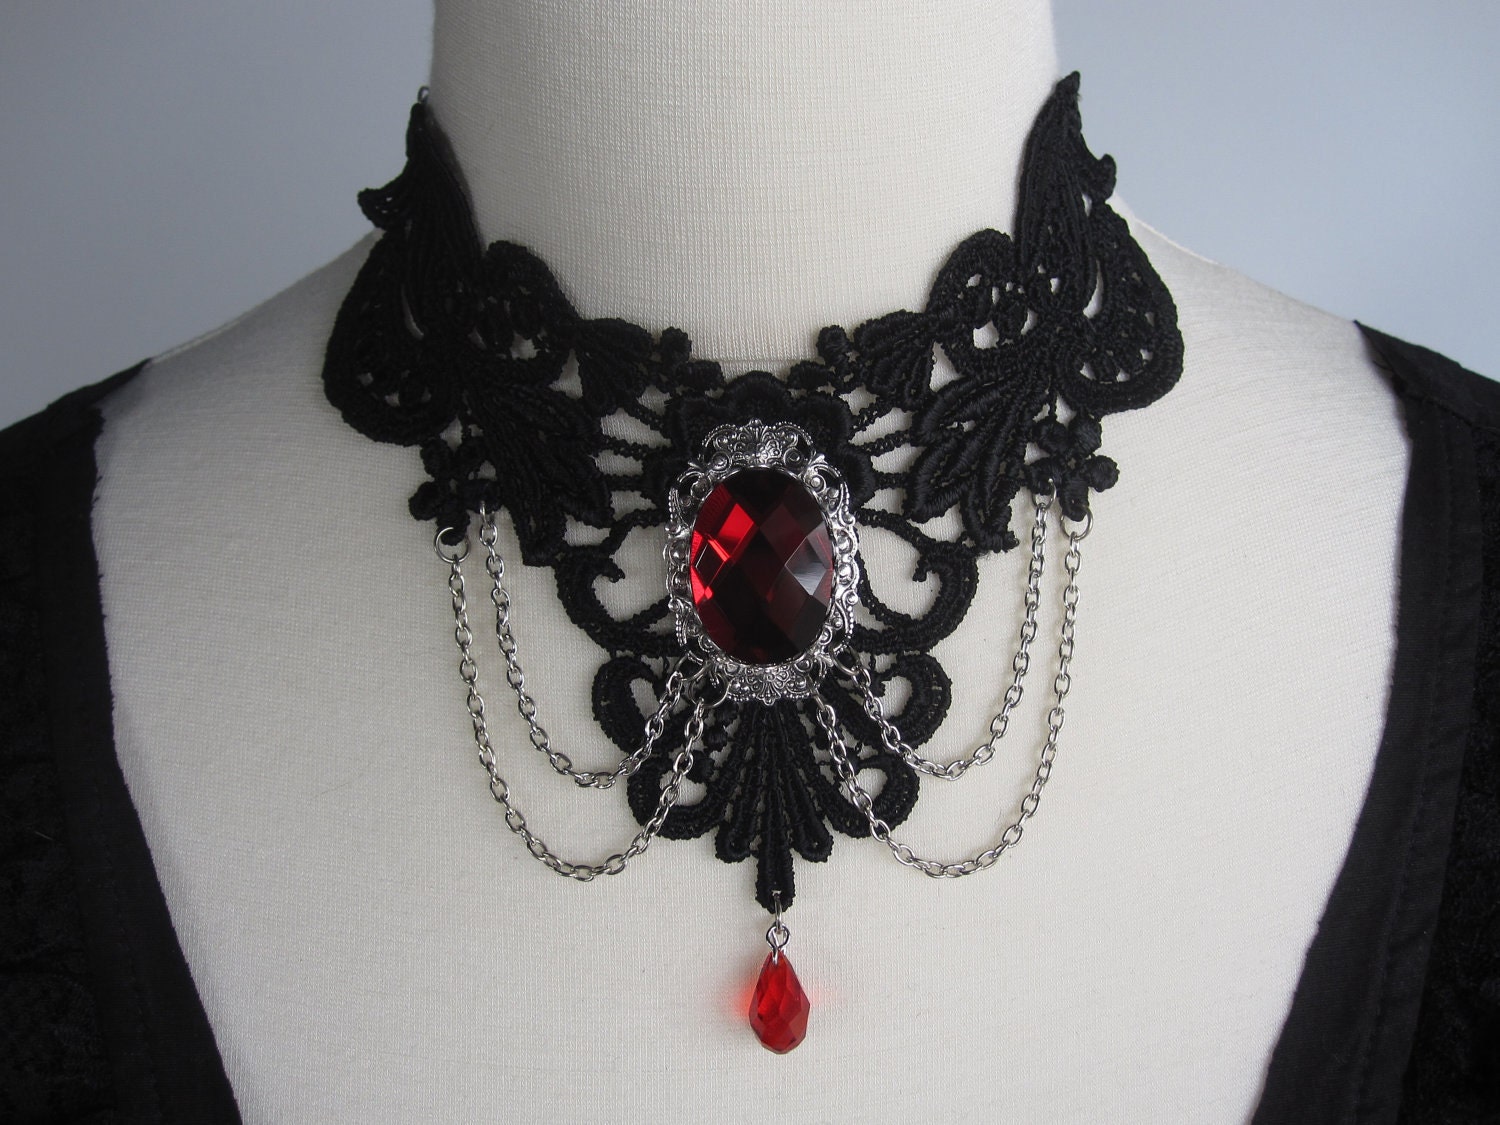 Lace Choker Necklace Black & Red Victorian Gothic Burlesque